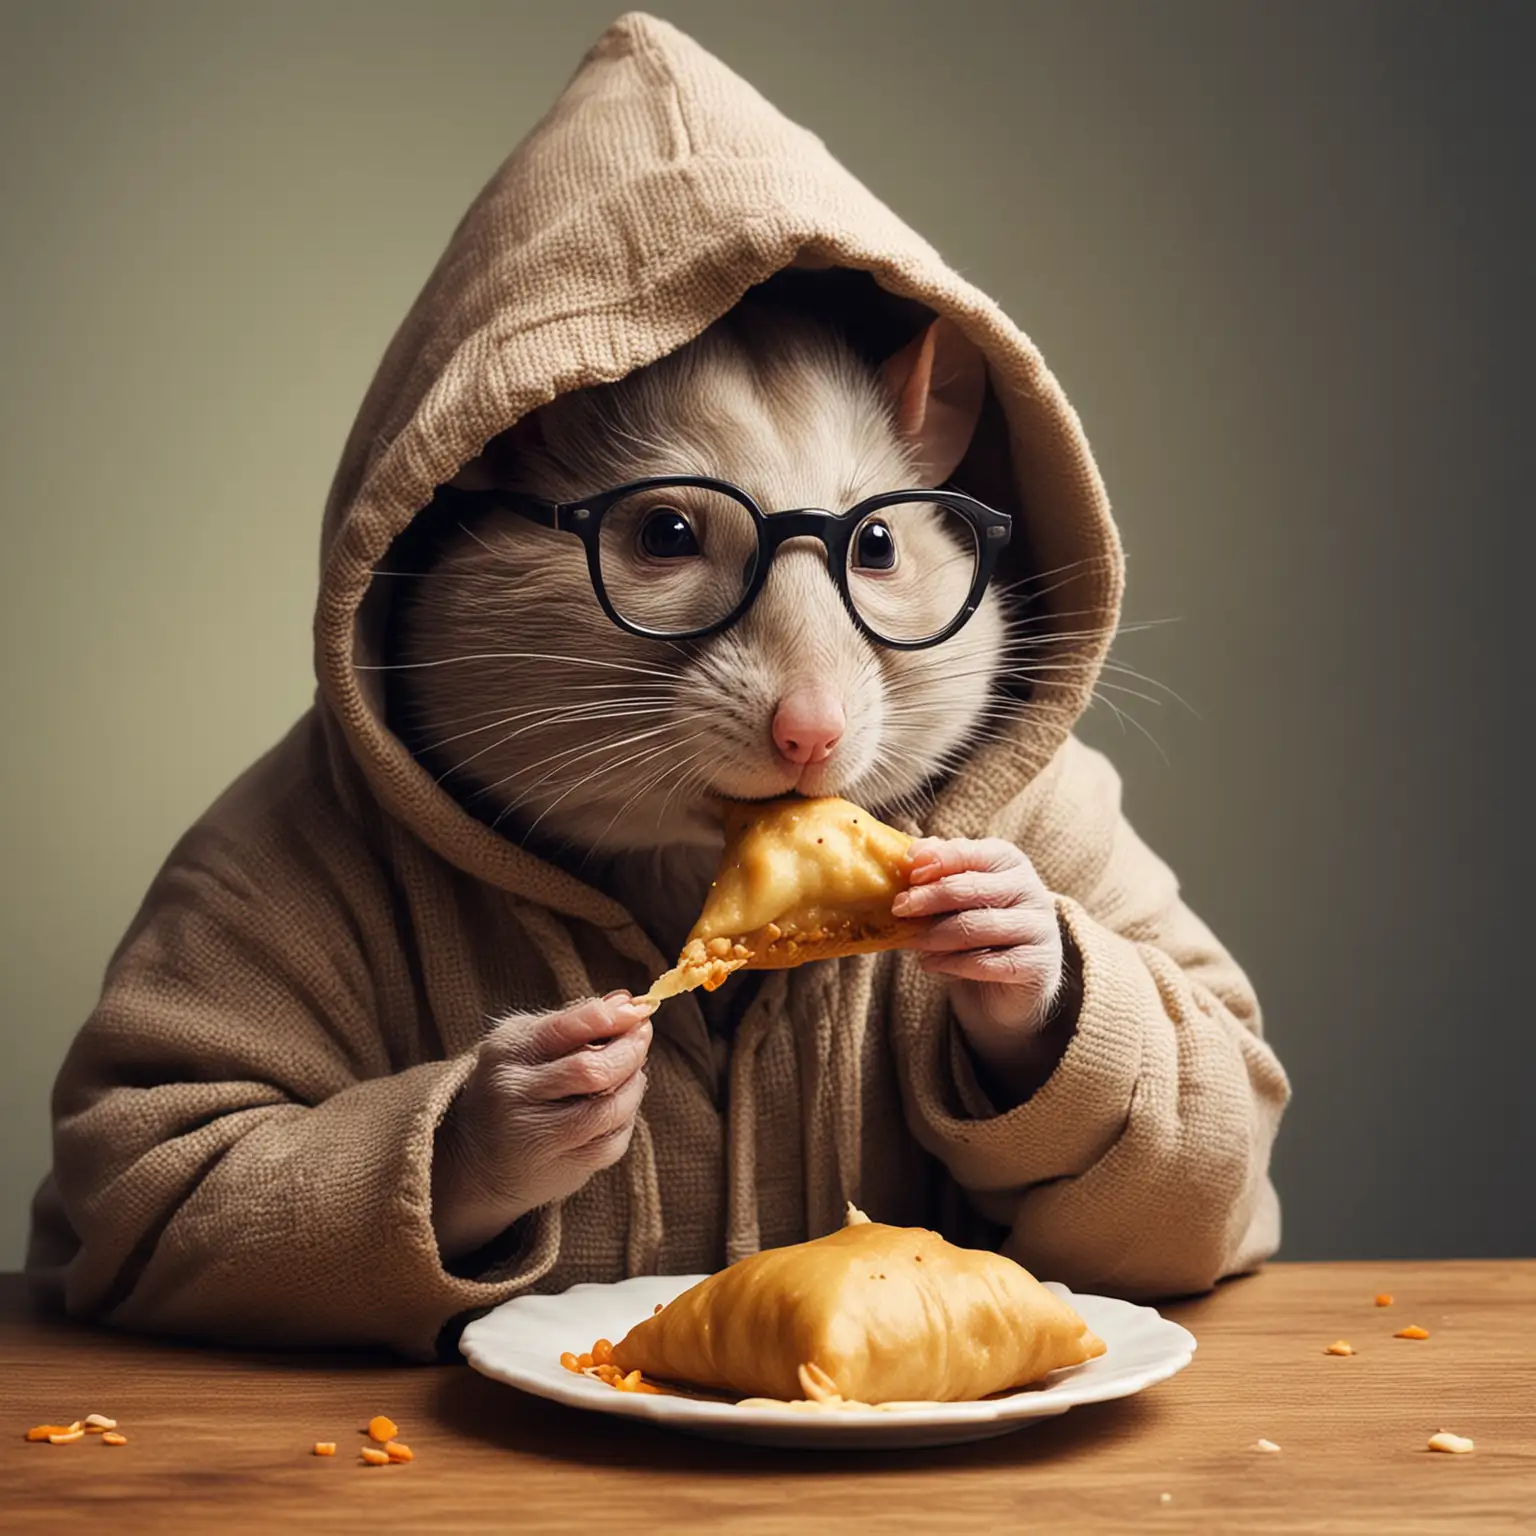 A rat in a hoody wearing glasses  eating samosa